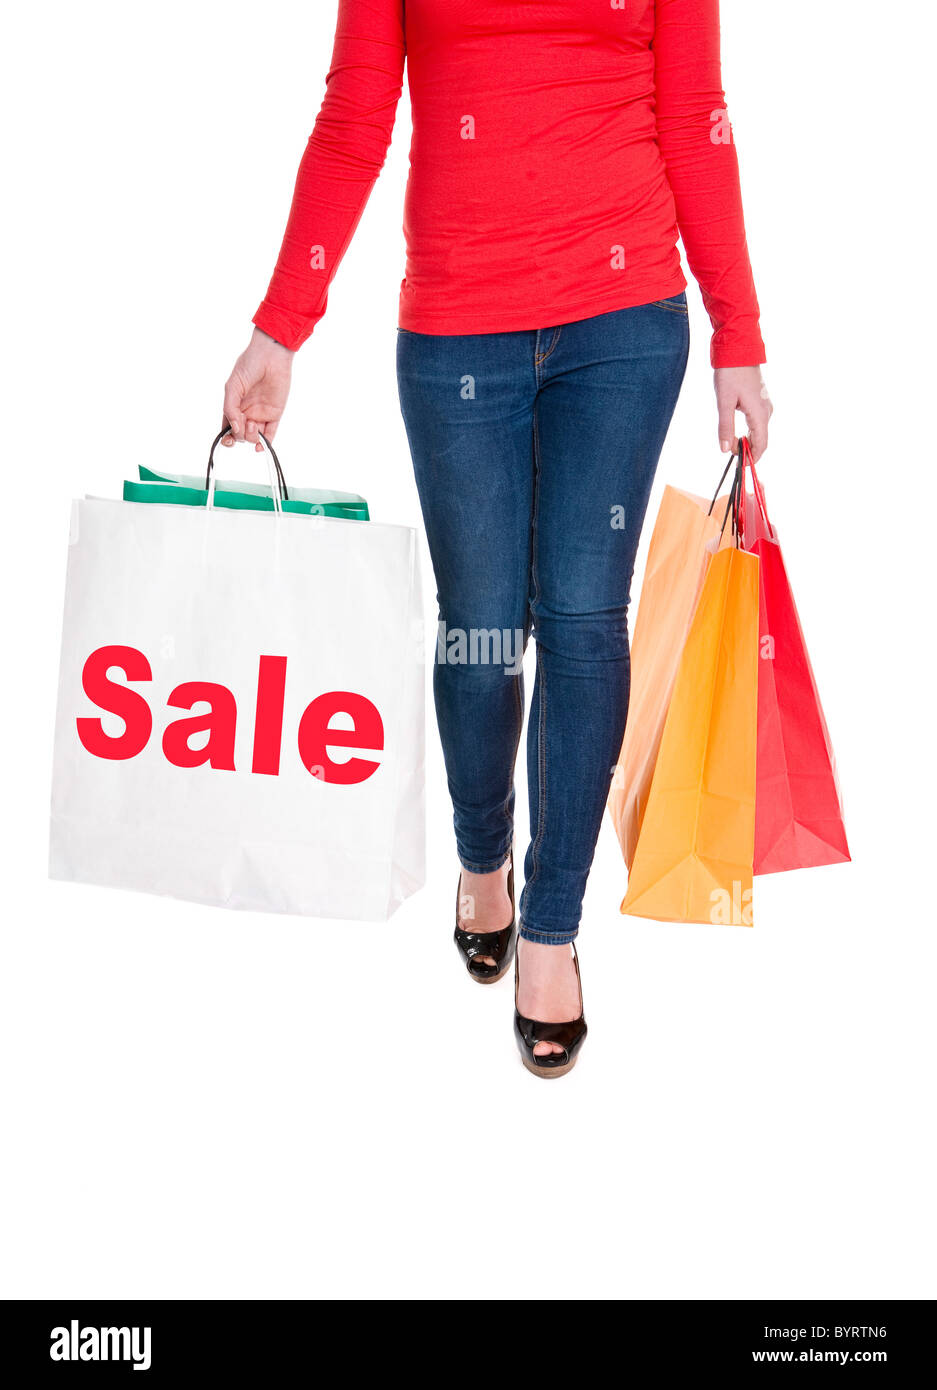 close-up of woman holding shopping bags displaying the sale sign Stock Photo